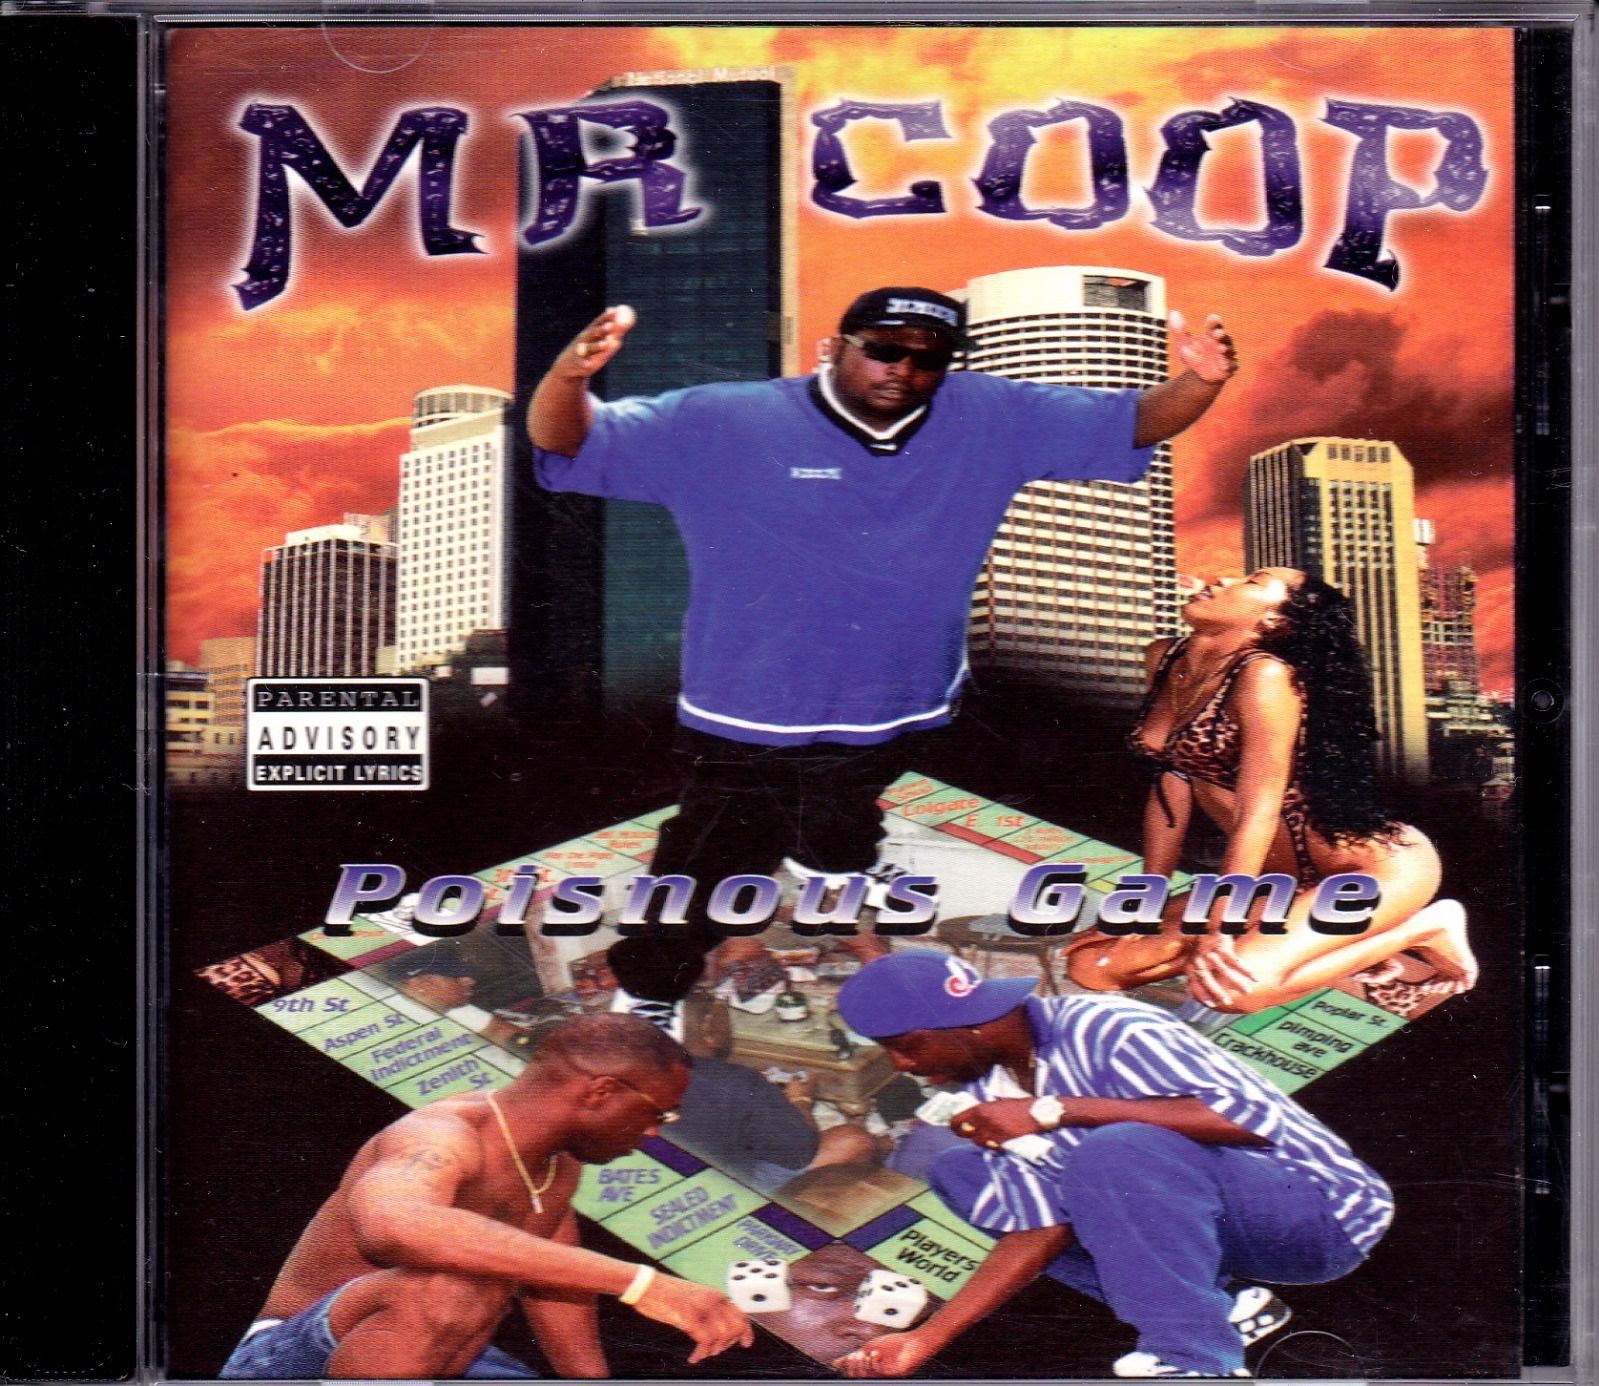 Mr. Coop - The Chosen One, Releases